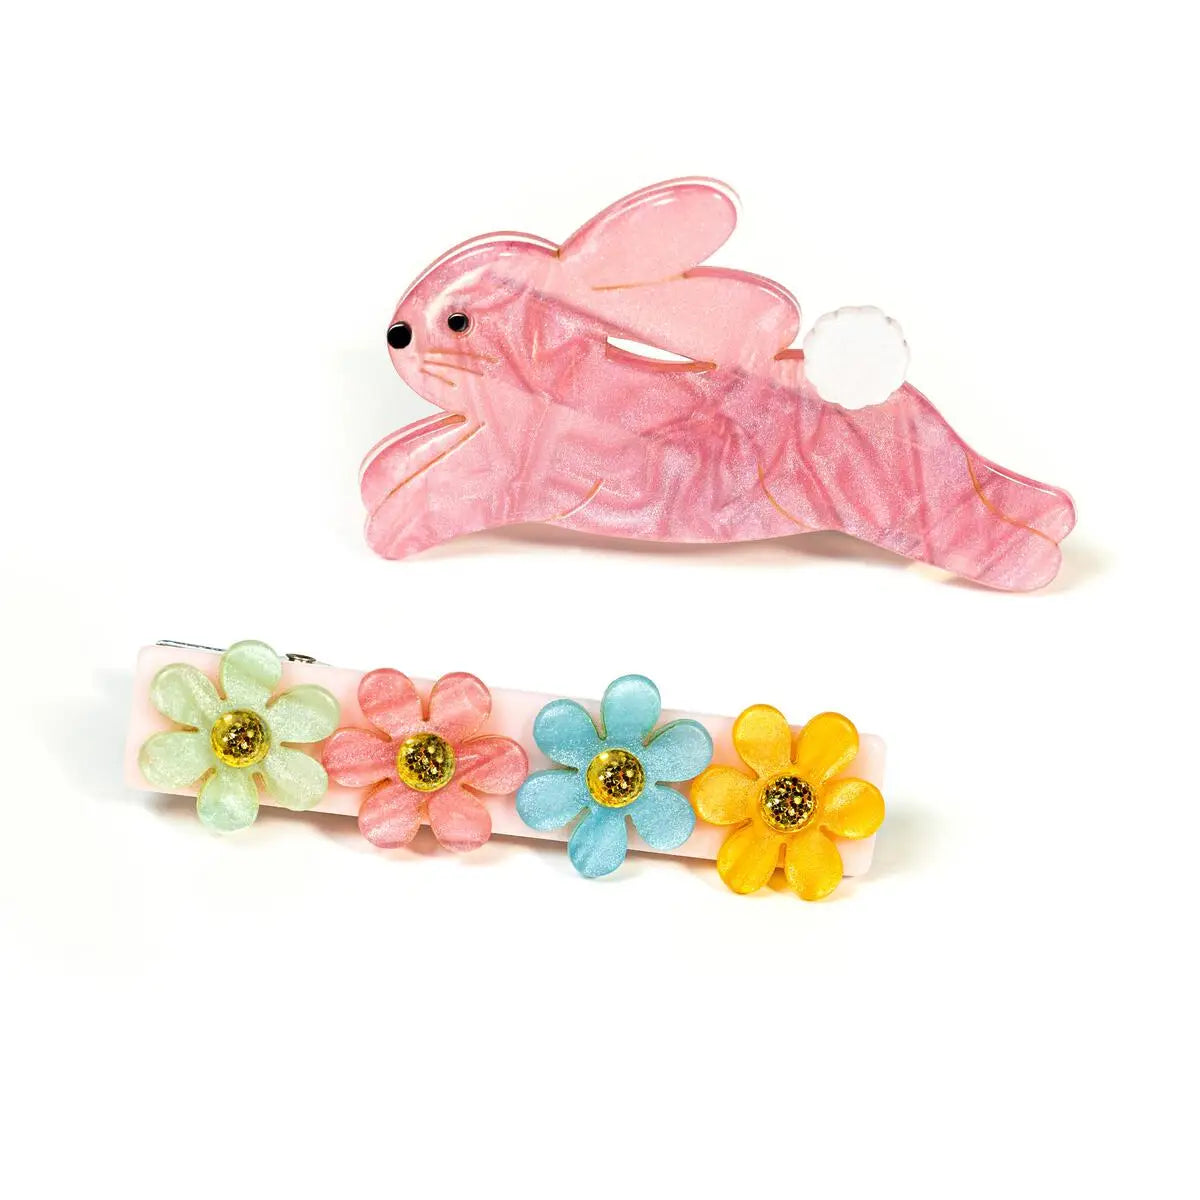 Lilies & Roses Hop Bunny Pearlized Alligator Clips, Set of 2 - Pink